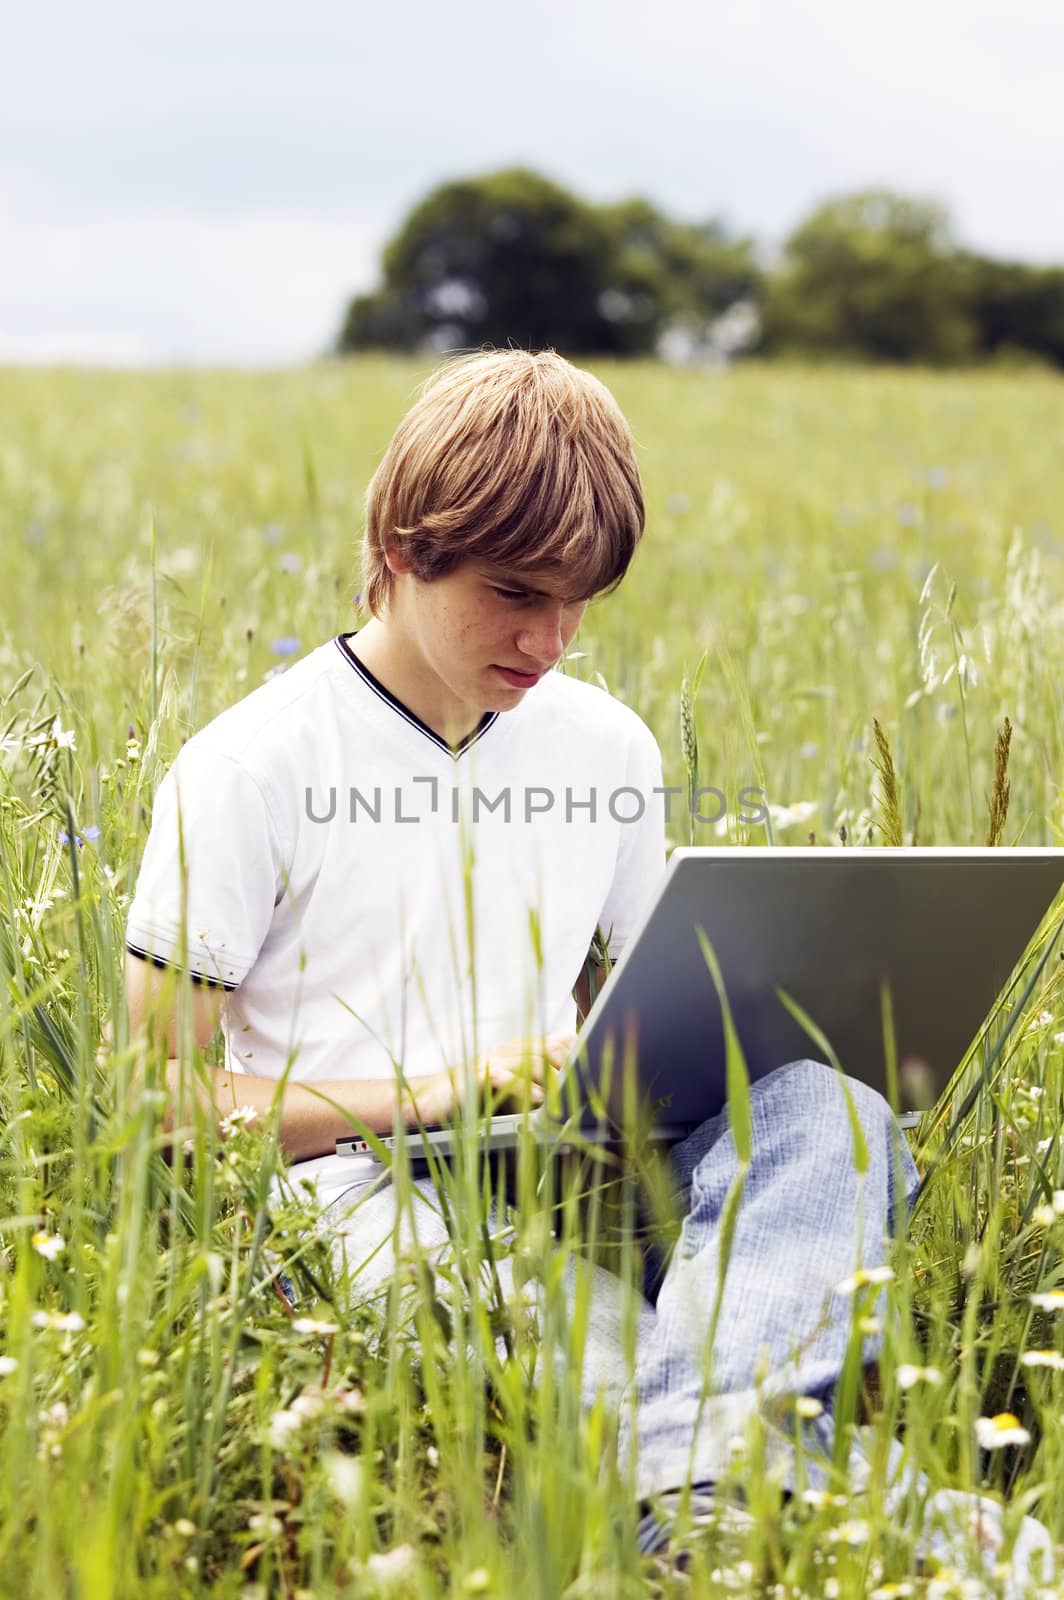 Boy using notebook outdoor on the field